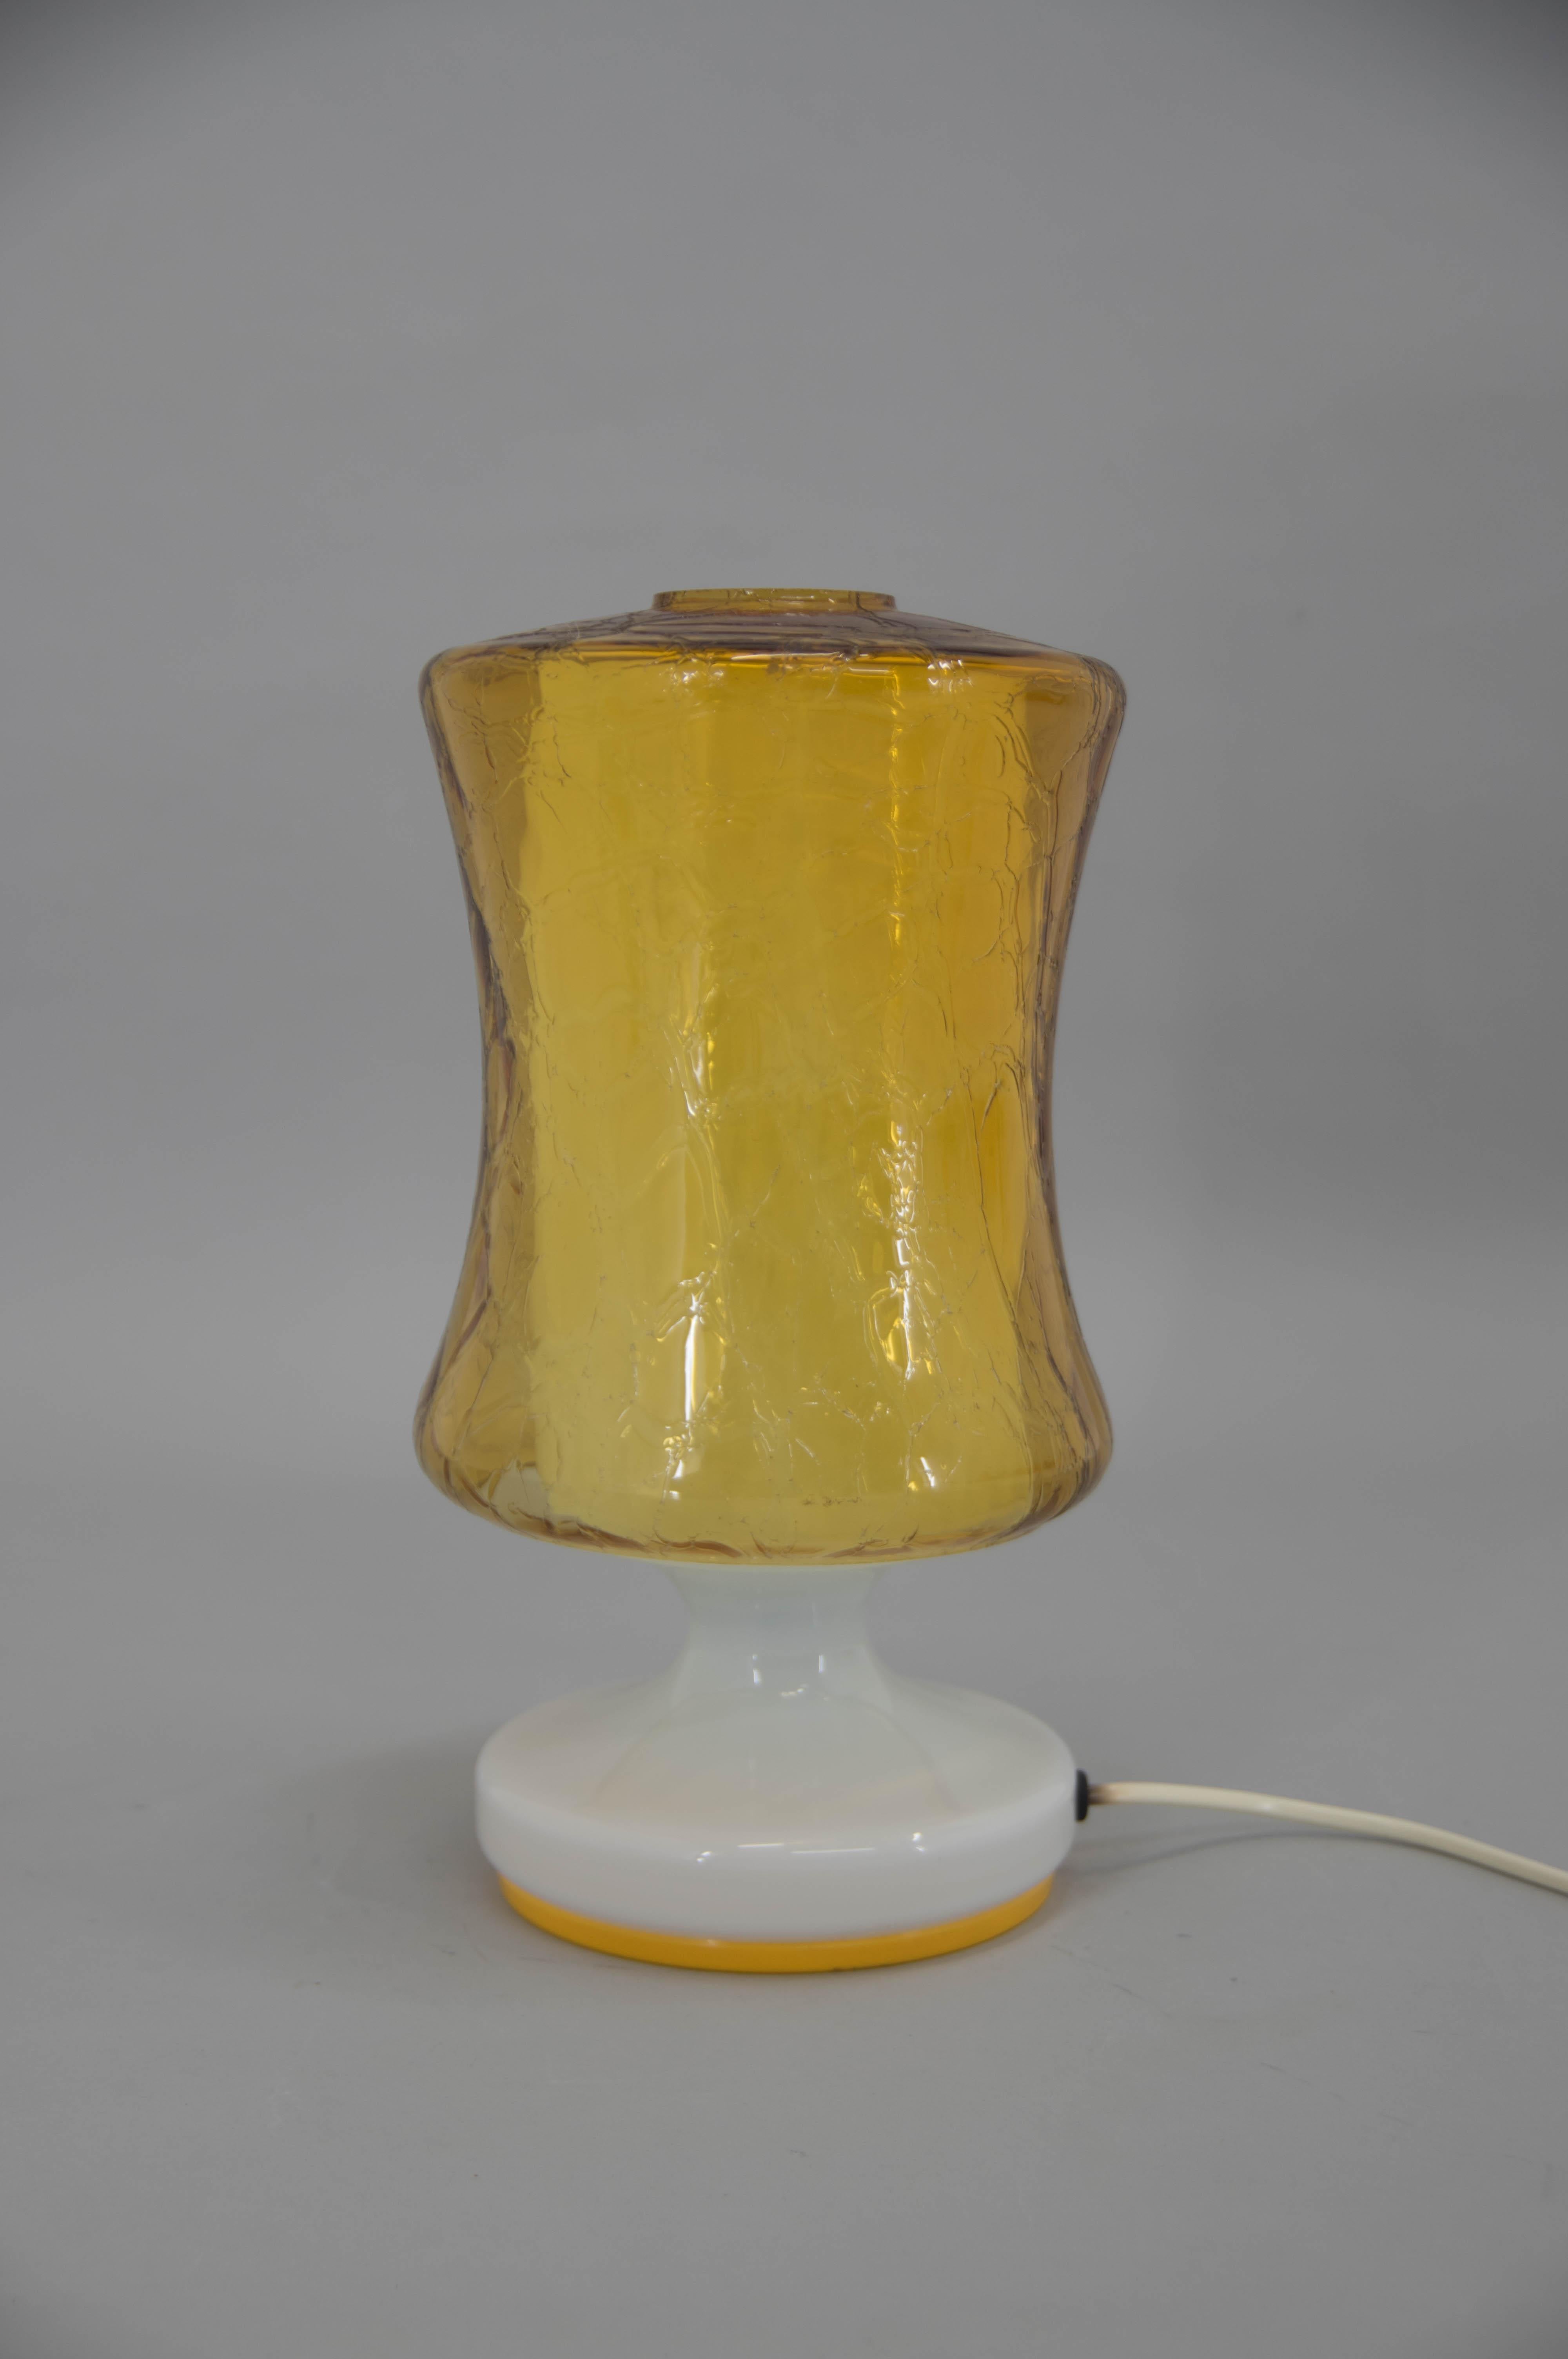 Made in Czechoslovakia in 1970s.
This table lamp consists of two glass parts.
Very good original condition without any damage.
1x60W, E25-E27 bulb
US plug adapter included